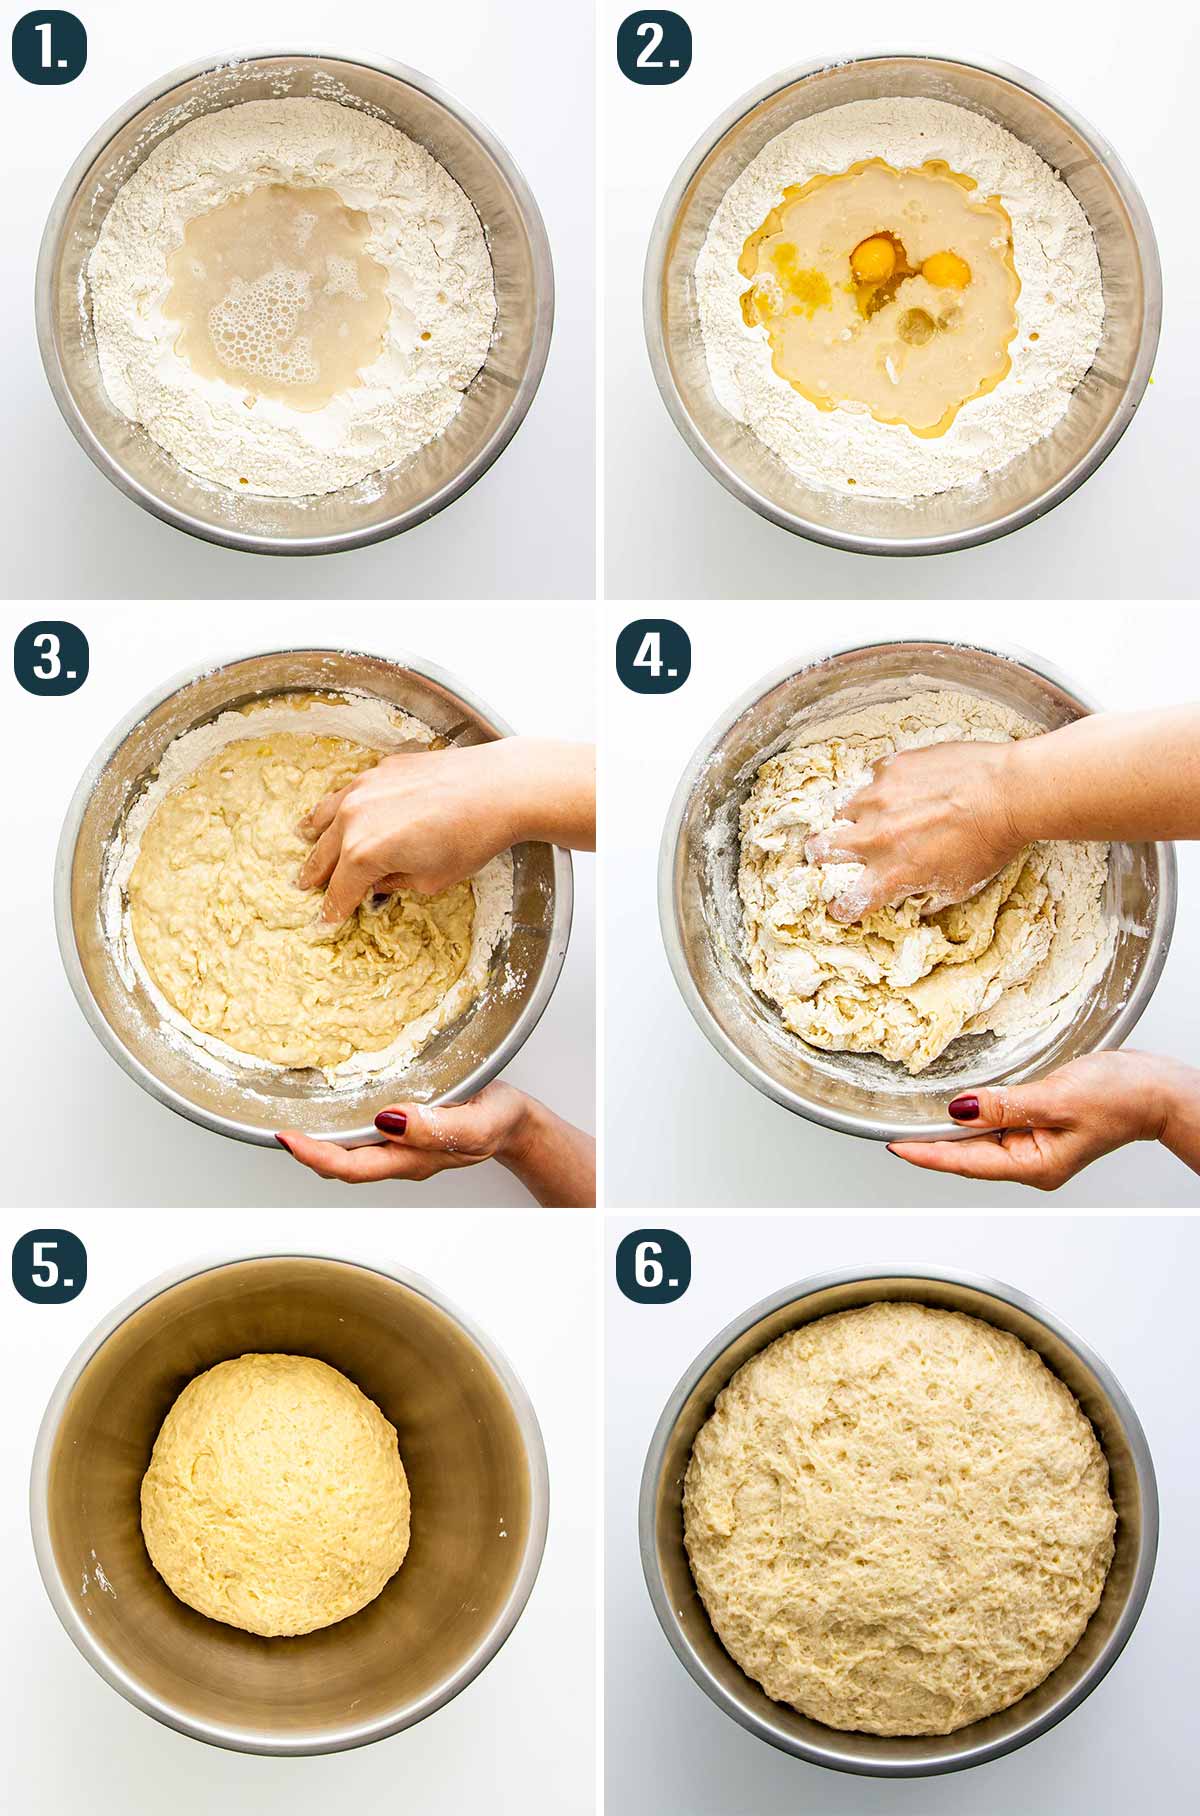 process shots showing how to make dough for sweet cheese buns.